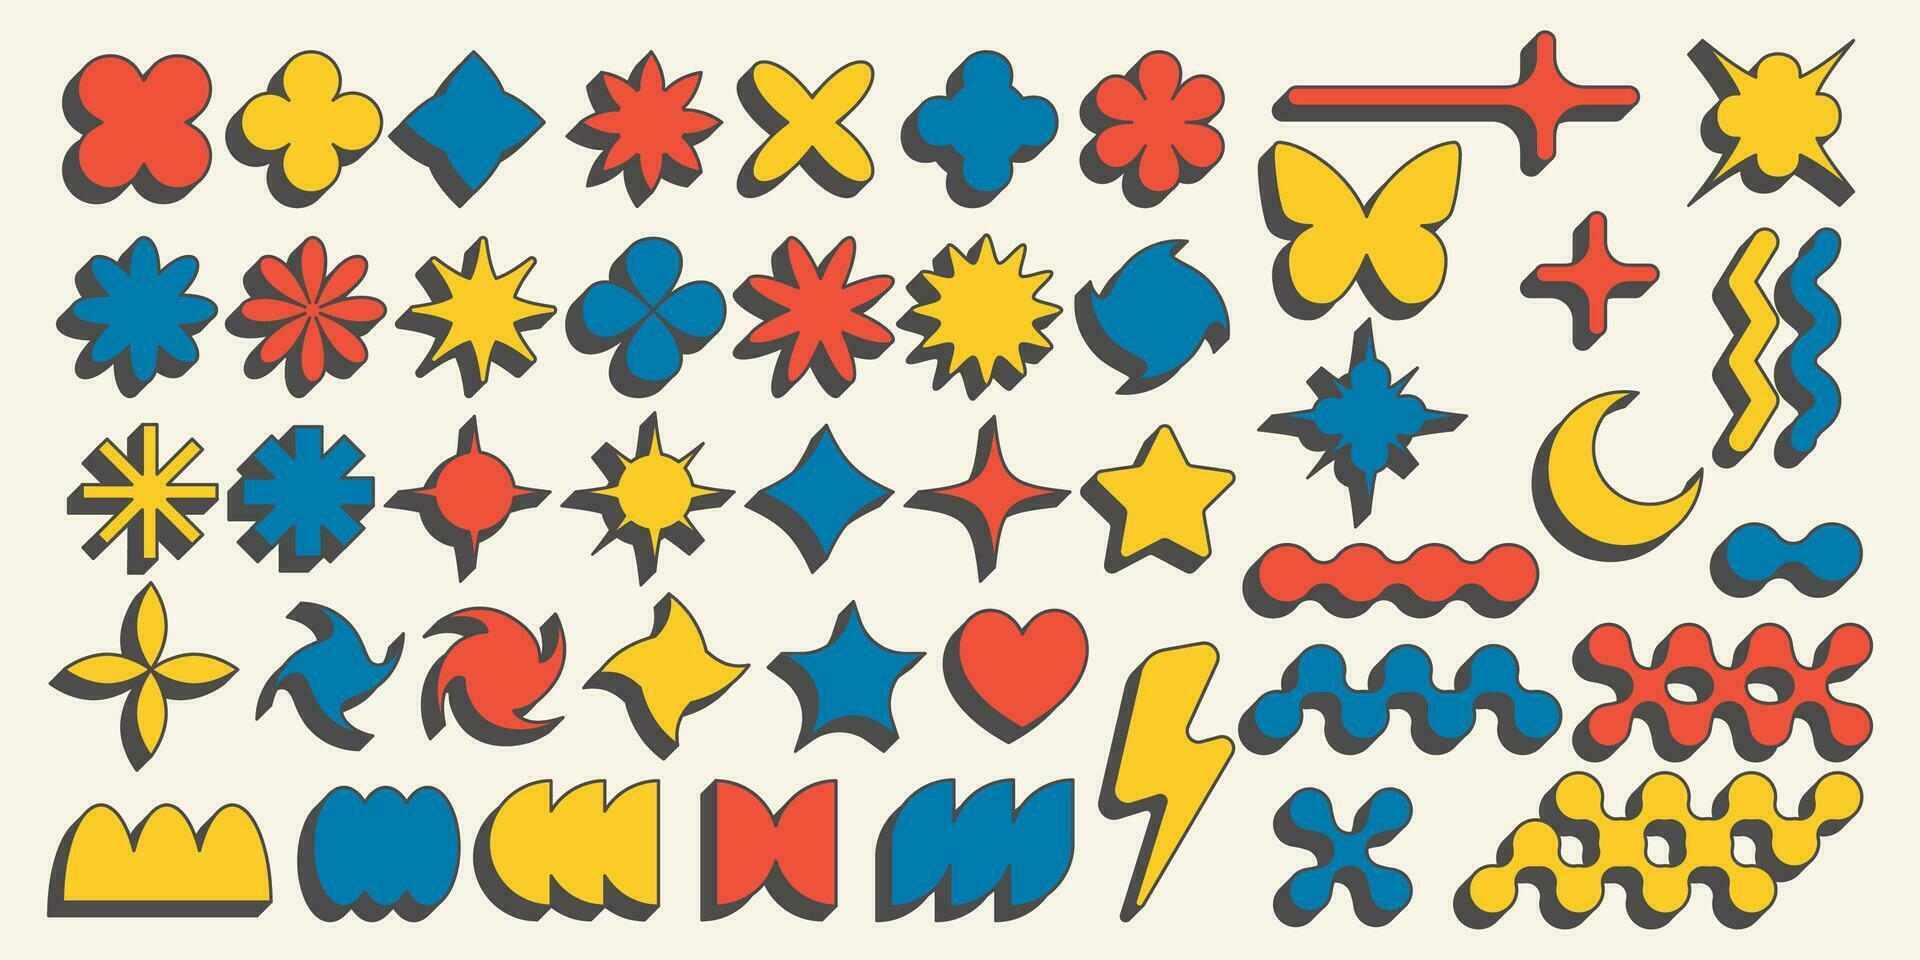 Abstract geometric elements for design. Neobrutalism graphic shapes. Minimal groovy Y2k retro stickers. Set of retro labels. Simple vector flowers, butterfly and stars.